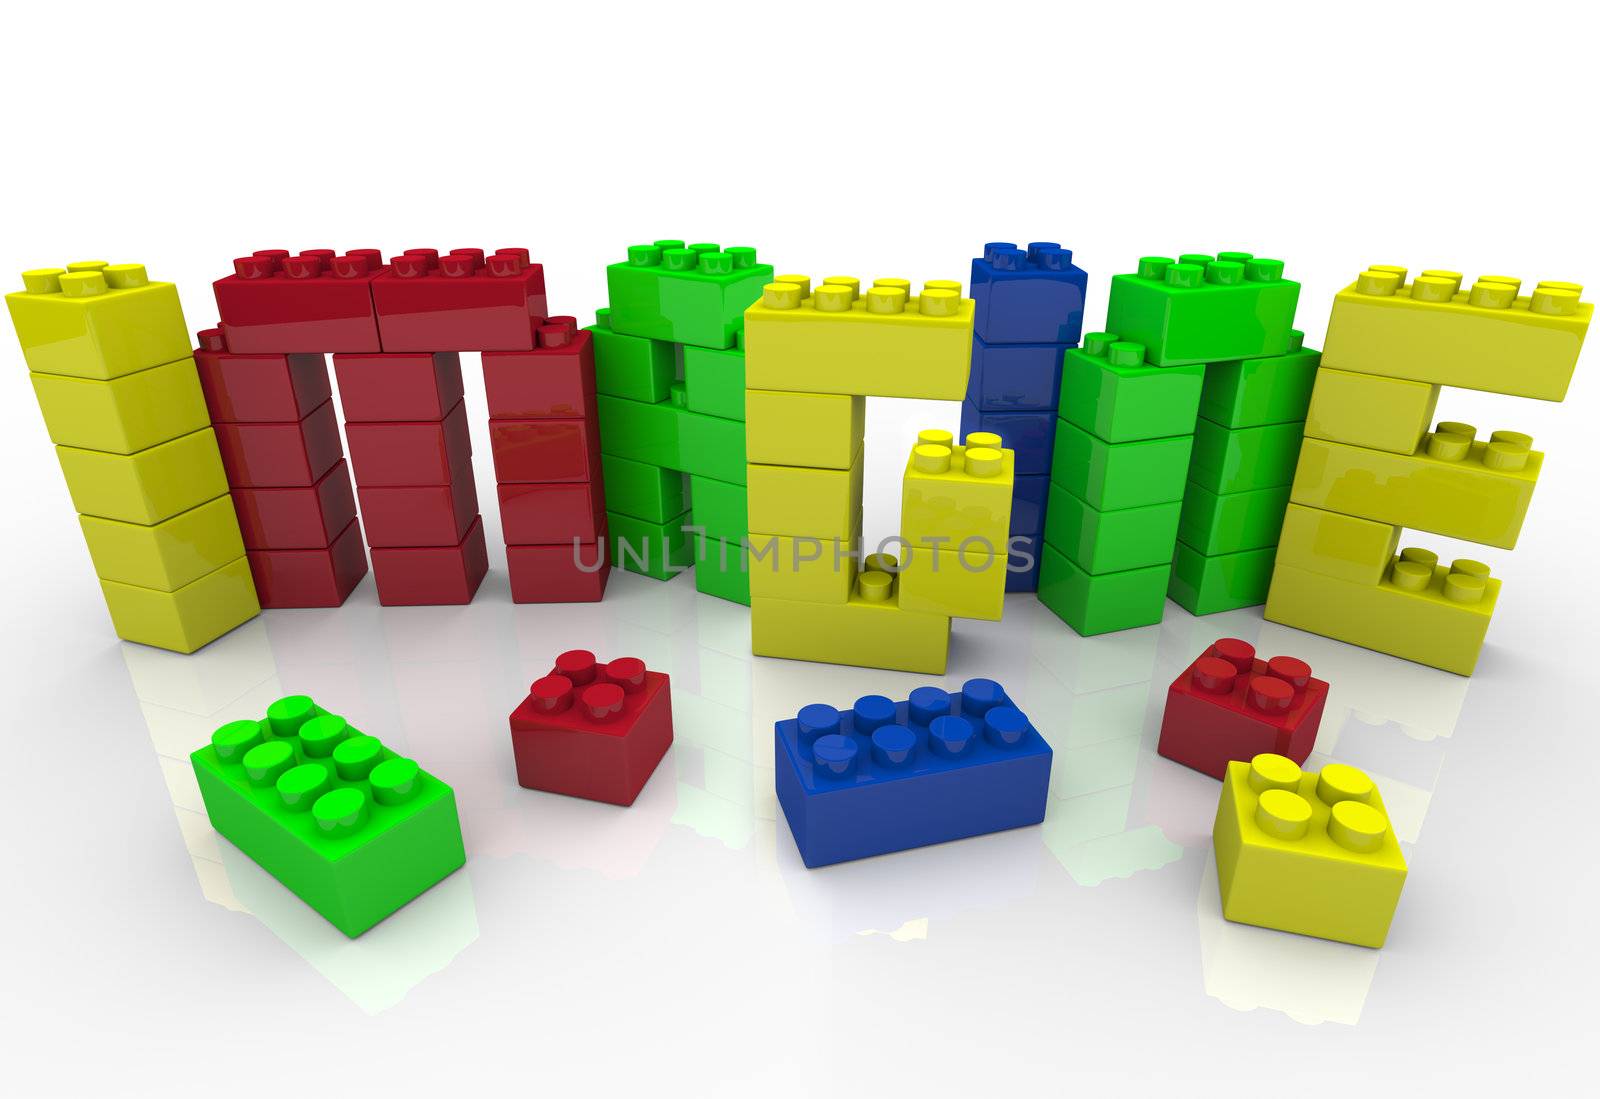 The word Imagine in colored toy plastic blocks representing the creative play a child enjoys with building blocks and the idea generation of using your creativity